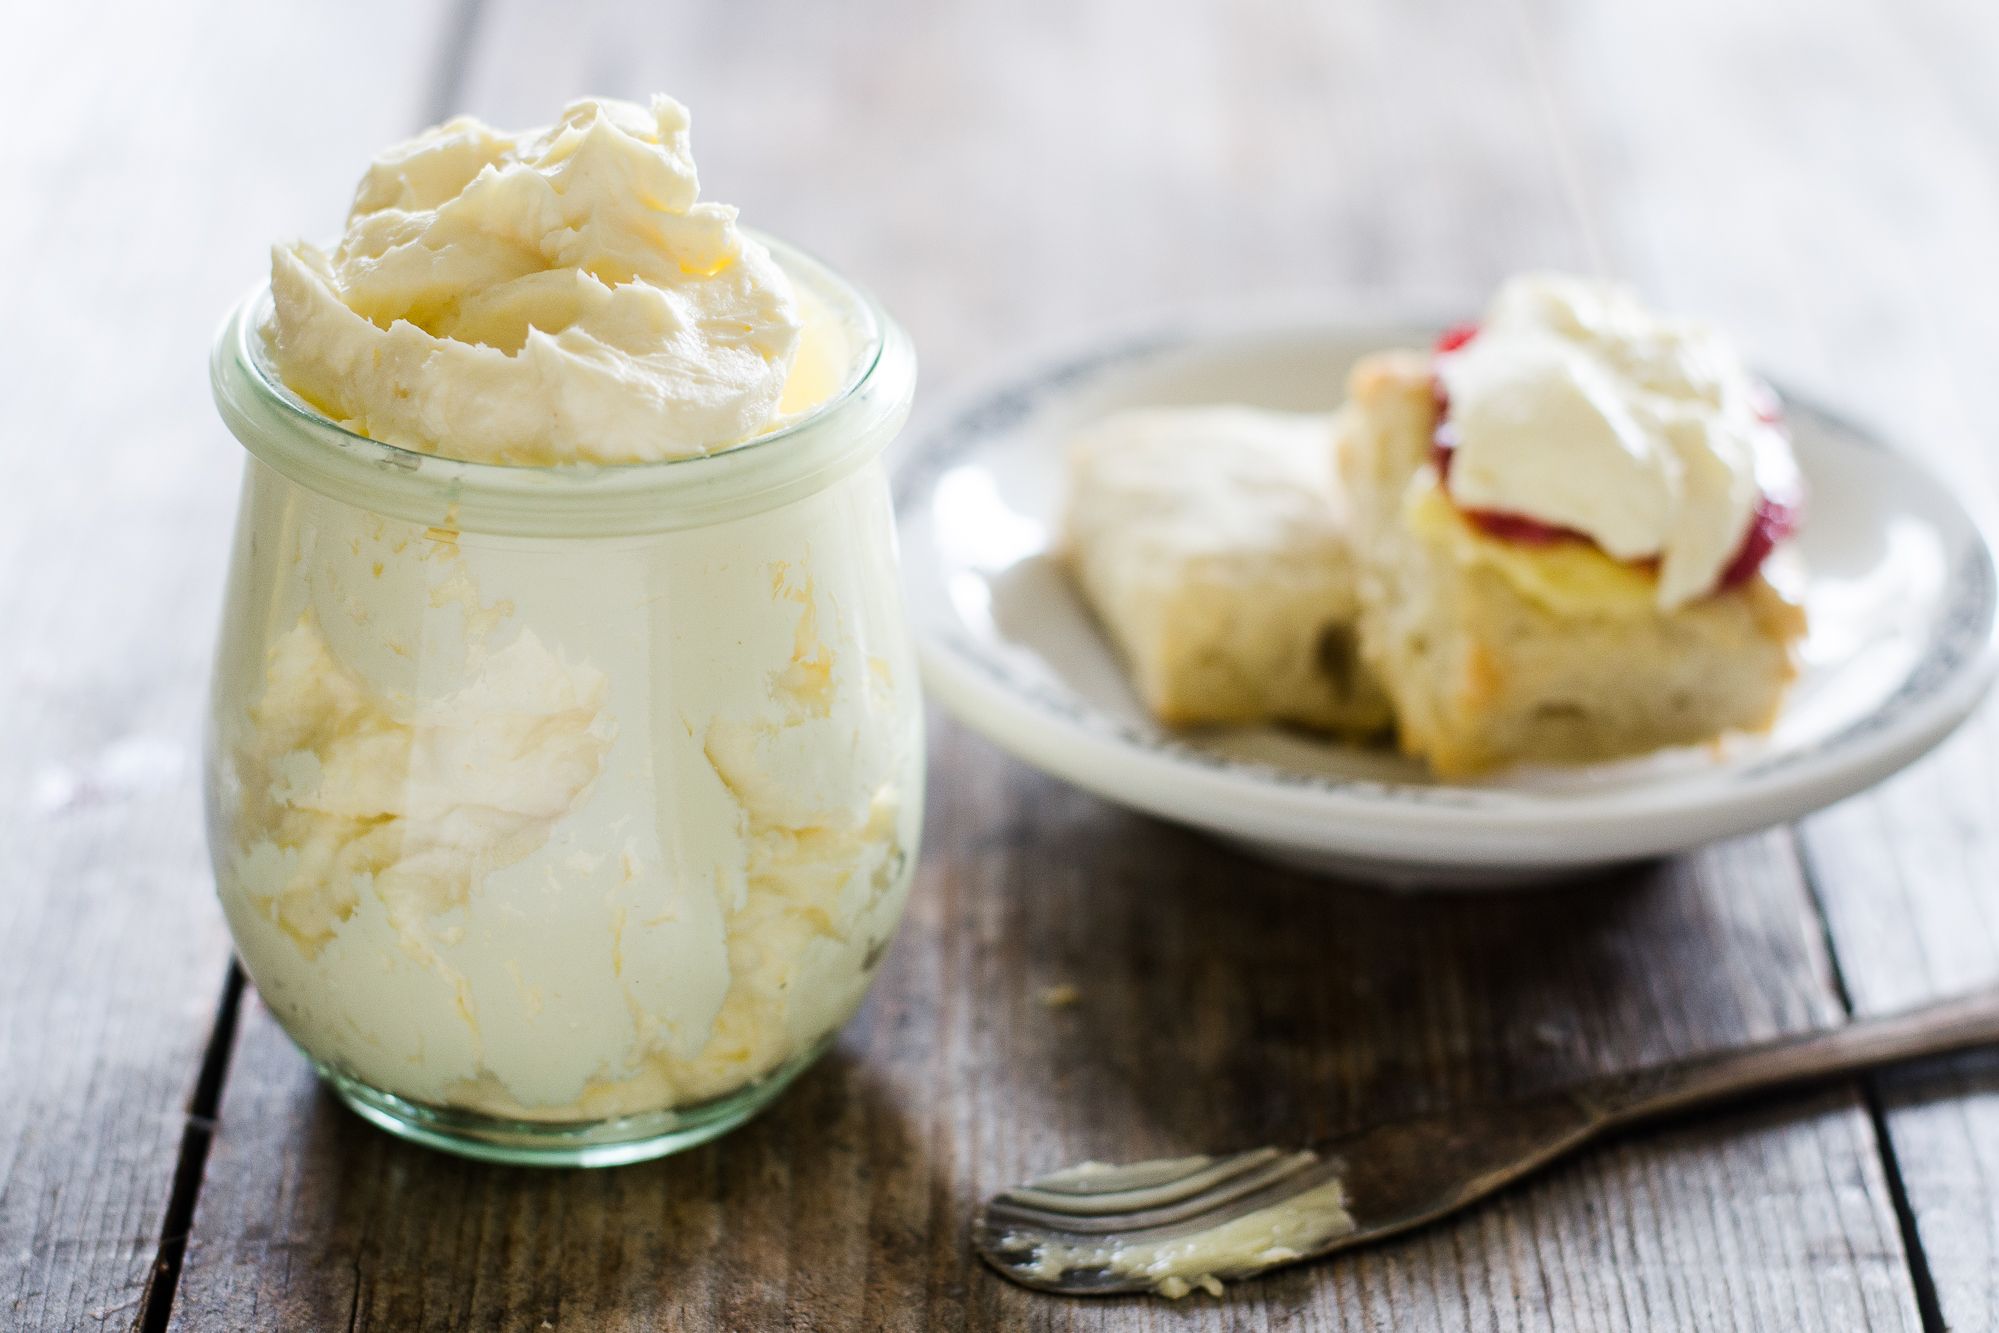 How to Make Mock Devonshire (Clotted) Cream